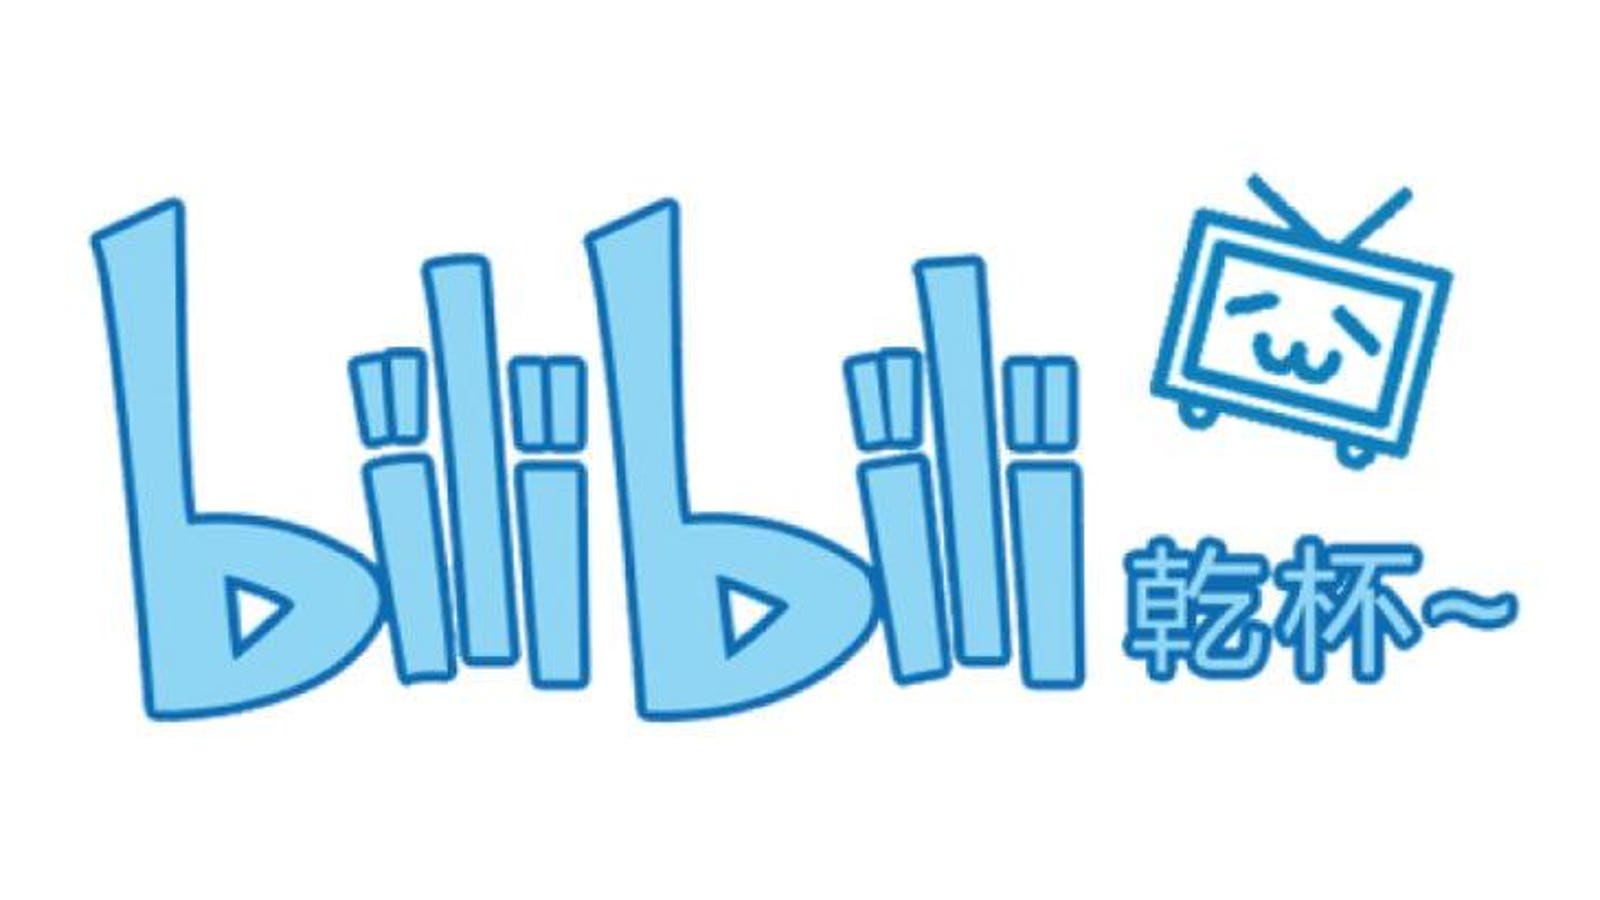 China Market Update: Bilibili & Full Truck Alliance Beat Expectations, WuXi Hit By Potential US Policy